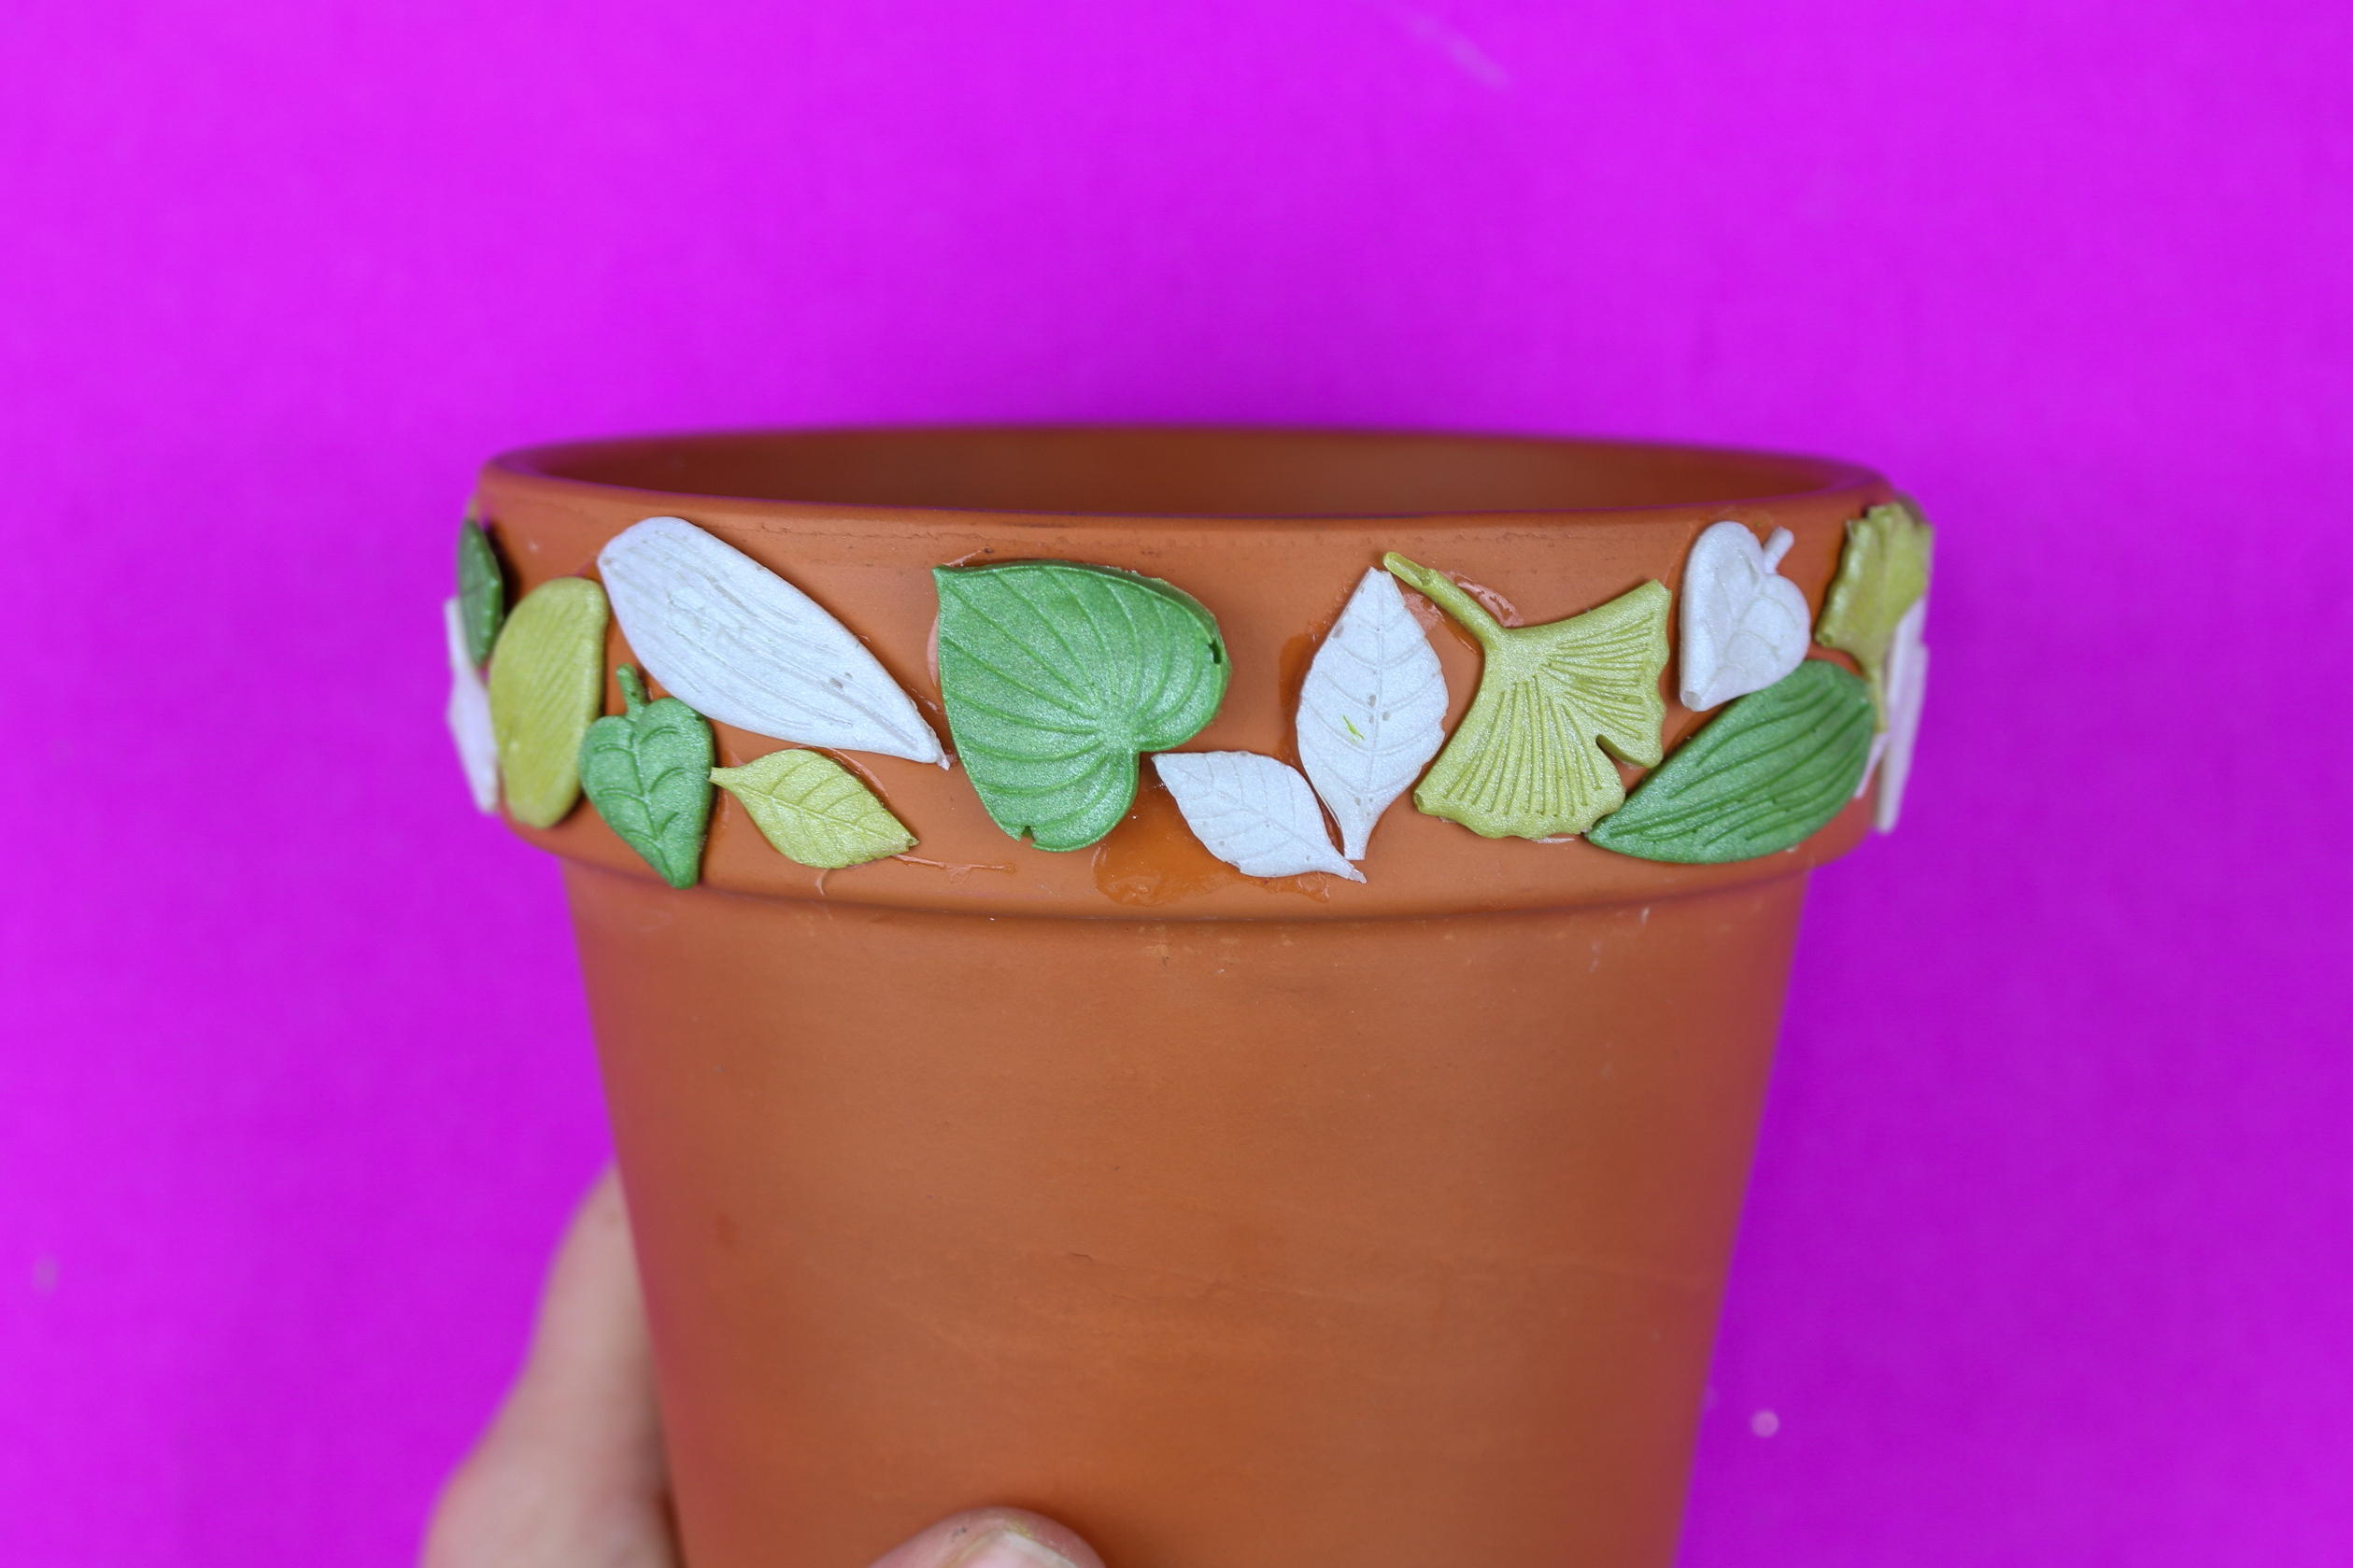 terracotta pot decorated with leaf shapes